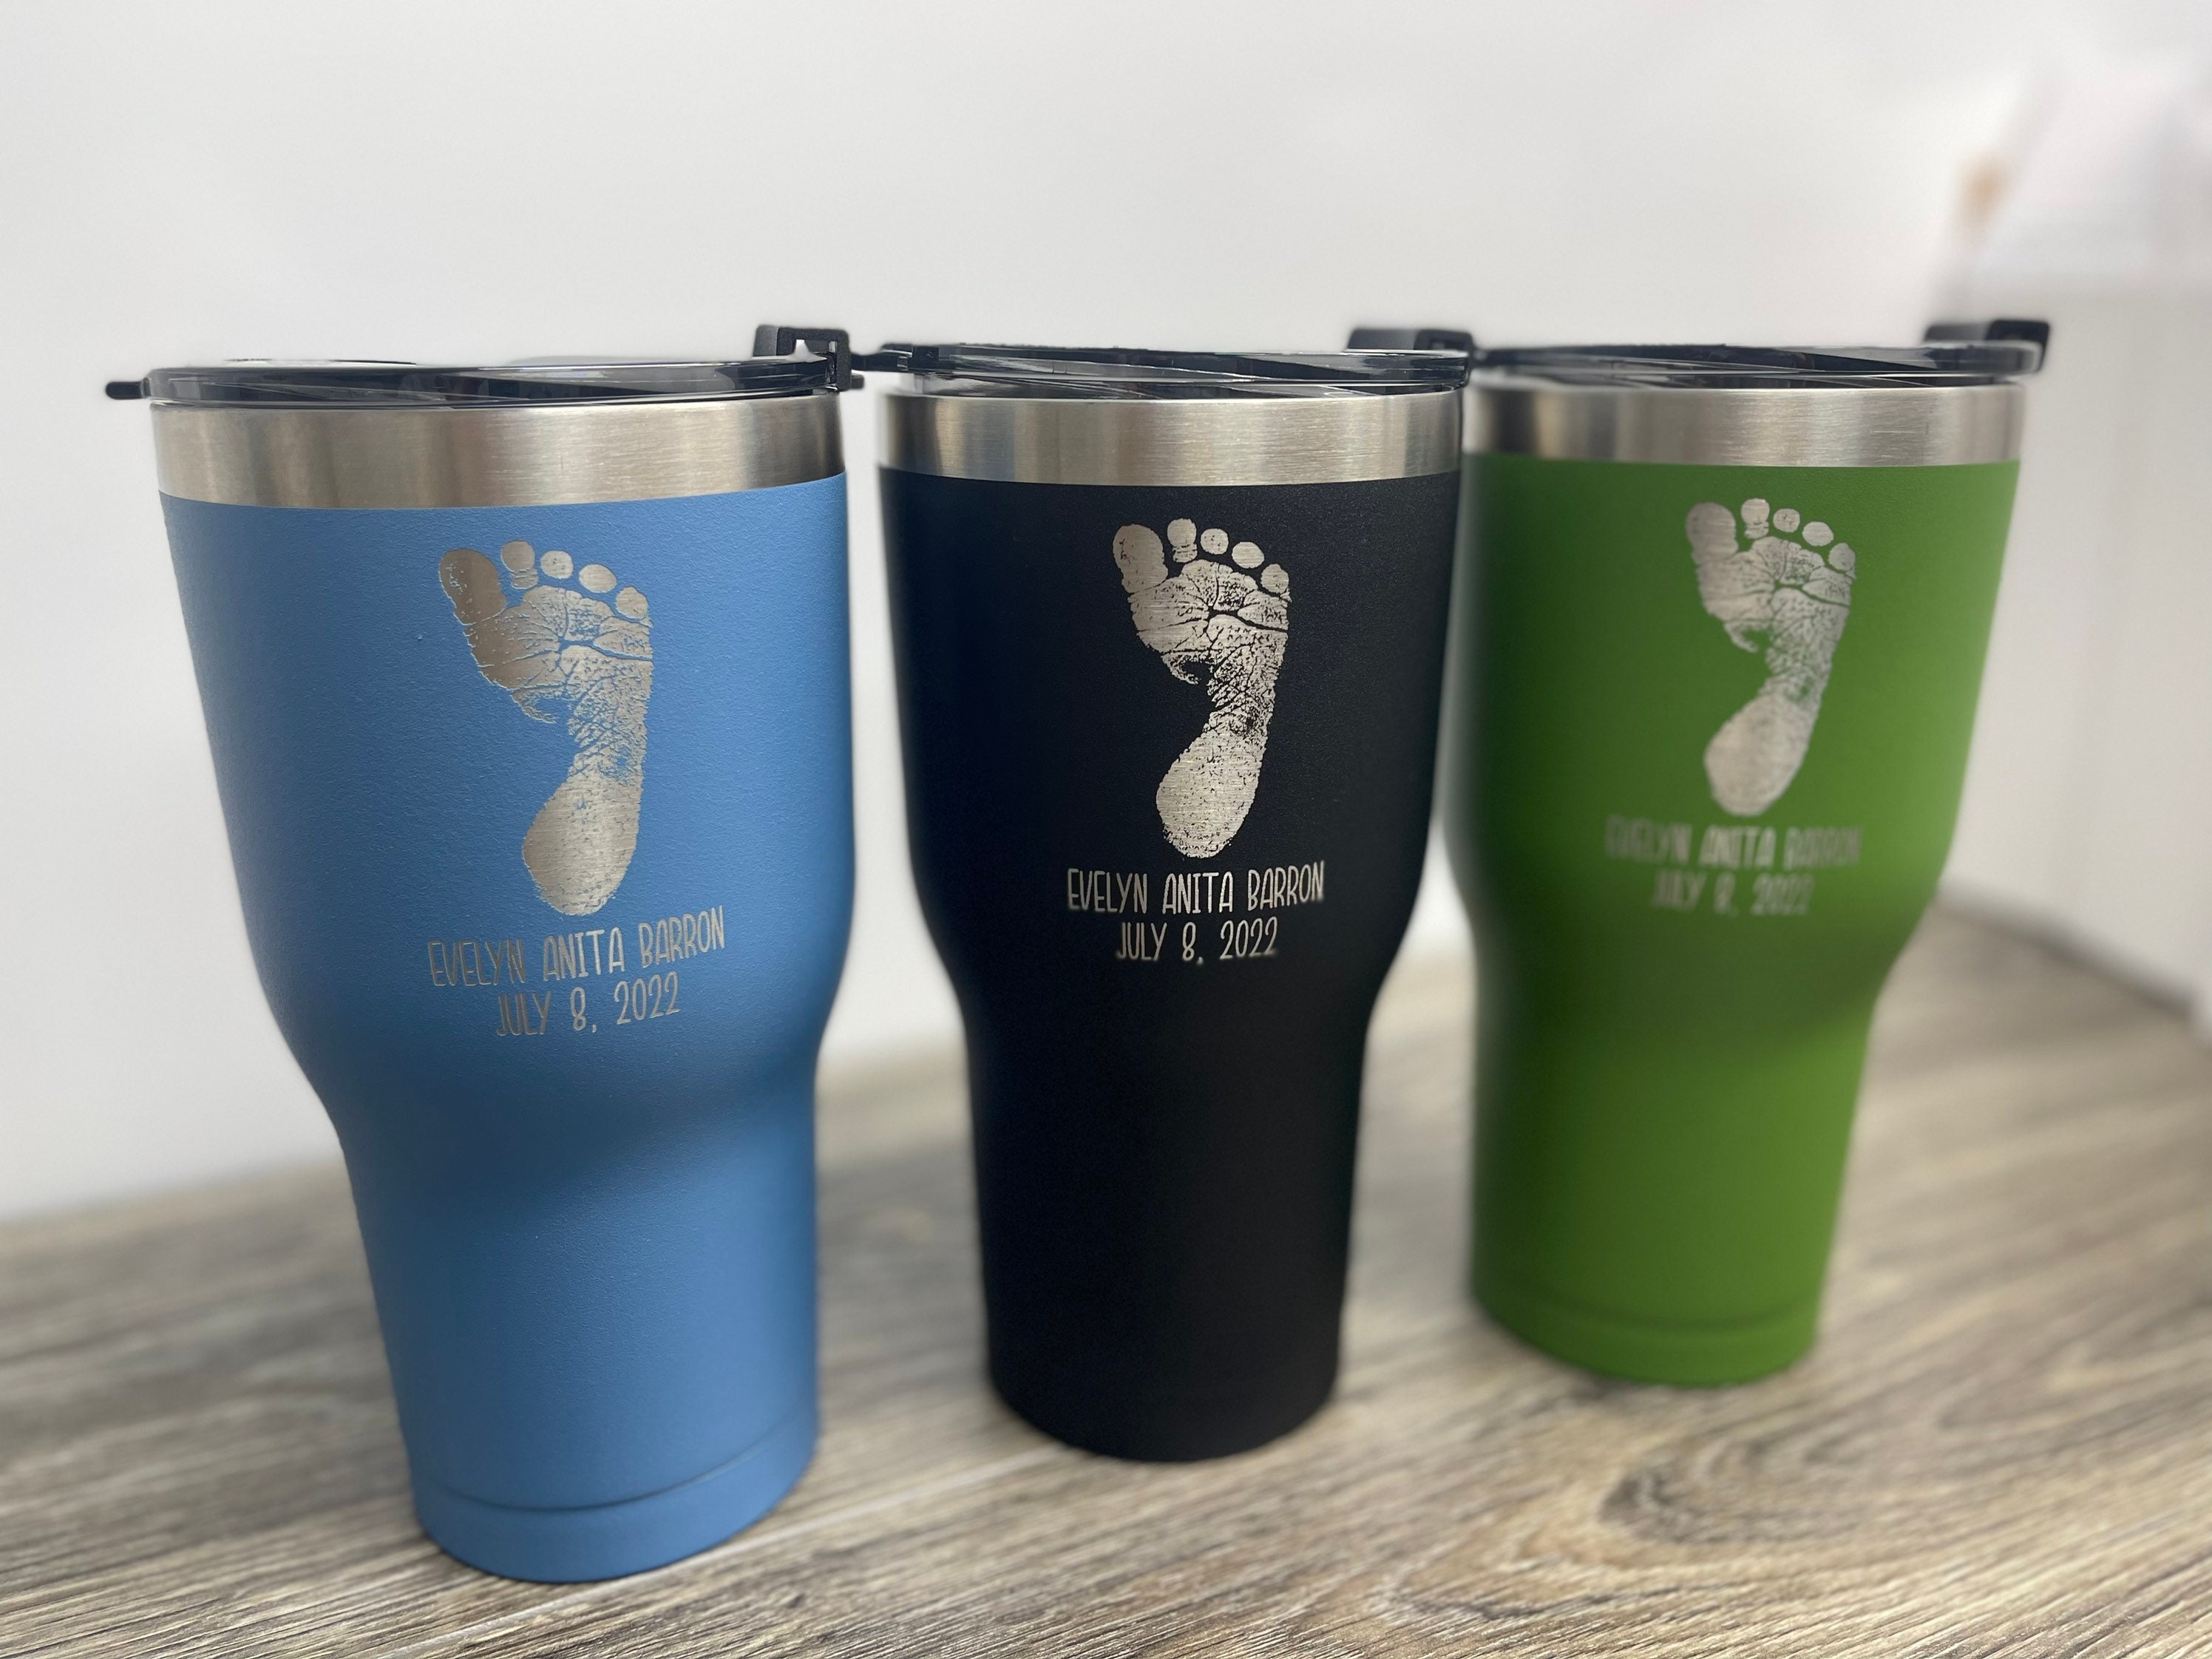 Personalized Personalized RTIC 30 oz Tumbler - Clearance Colors